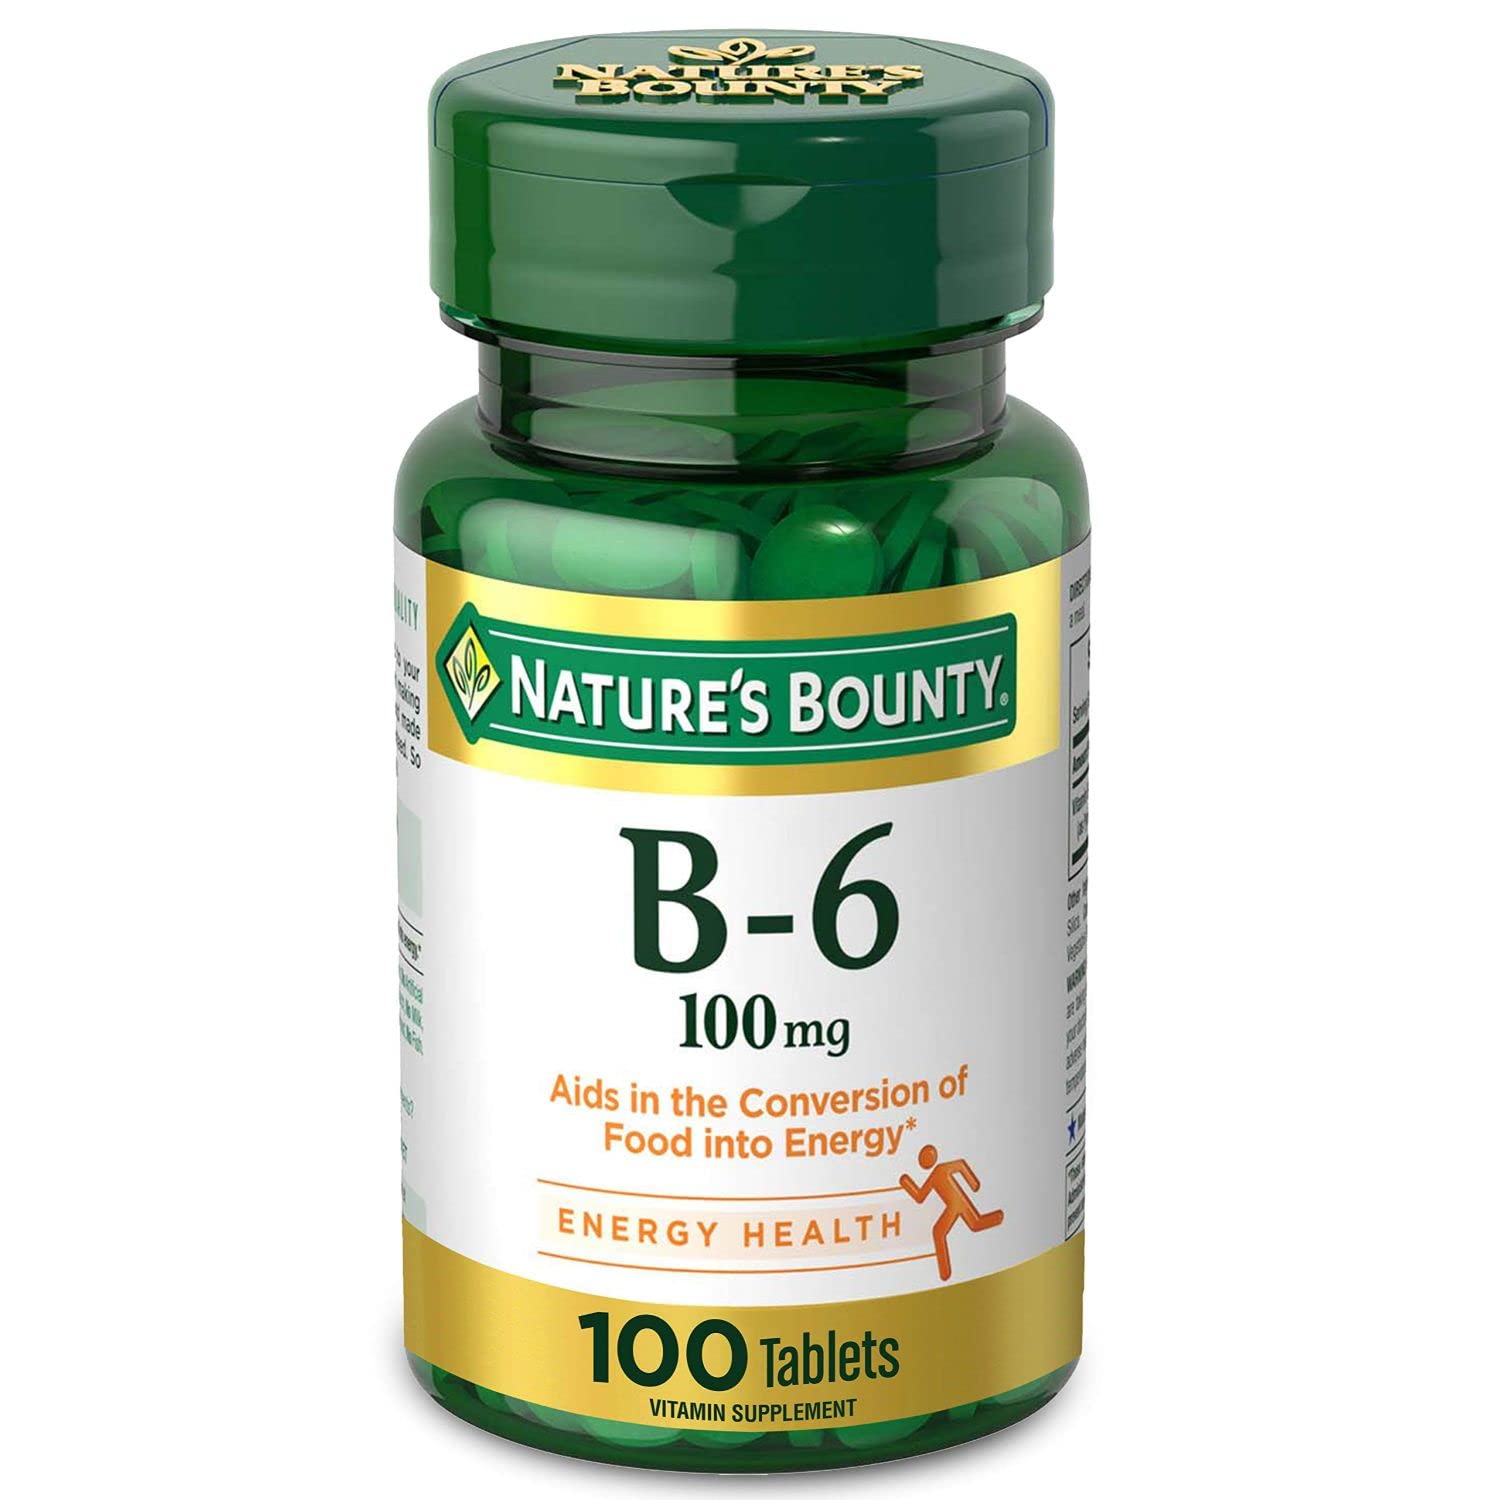 Nature’s Bounty Vitamin B6, Supports Energy Metabolism and Nervous System Health, 100mg, Tablets, 100 Ct